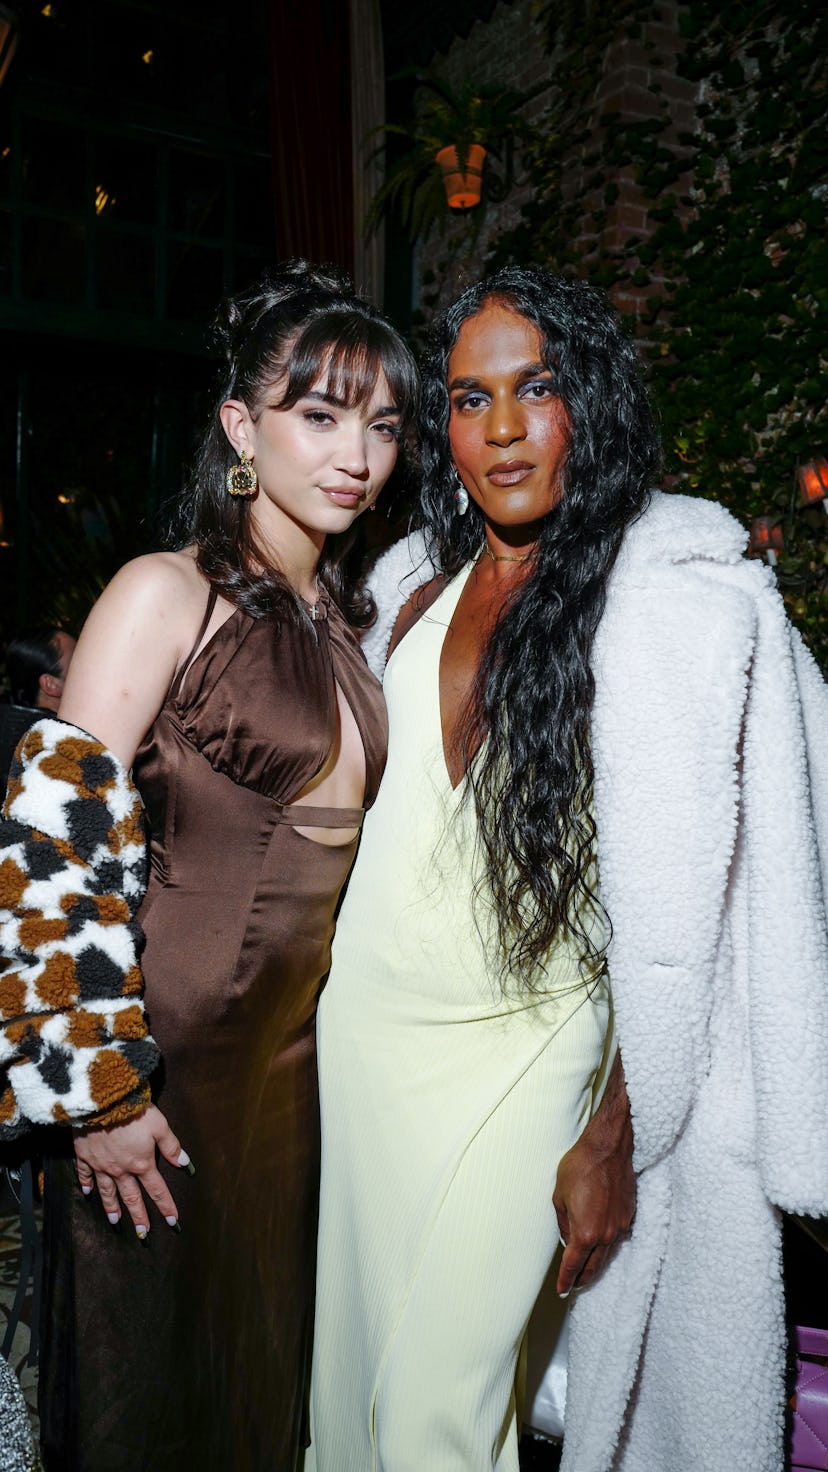 Rowan Blanchard and Richie Shazam celebrate the UGG Autumn/Winter 2021 apparel campaign with an inti...